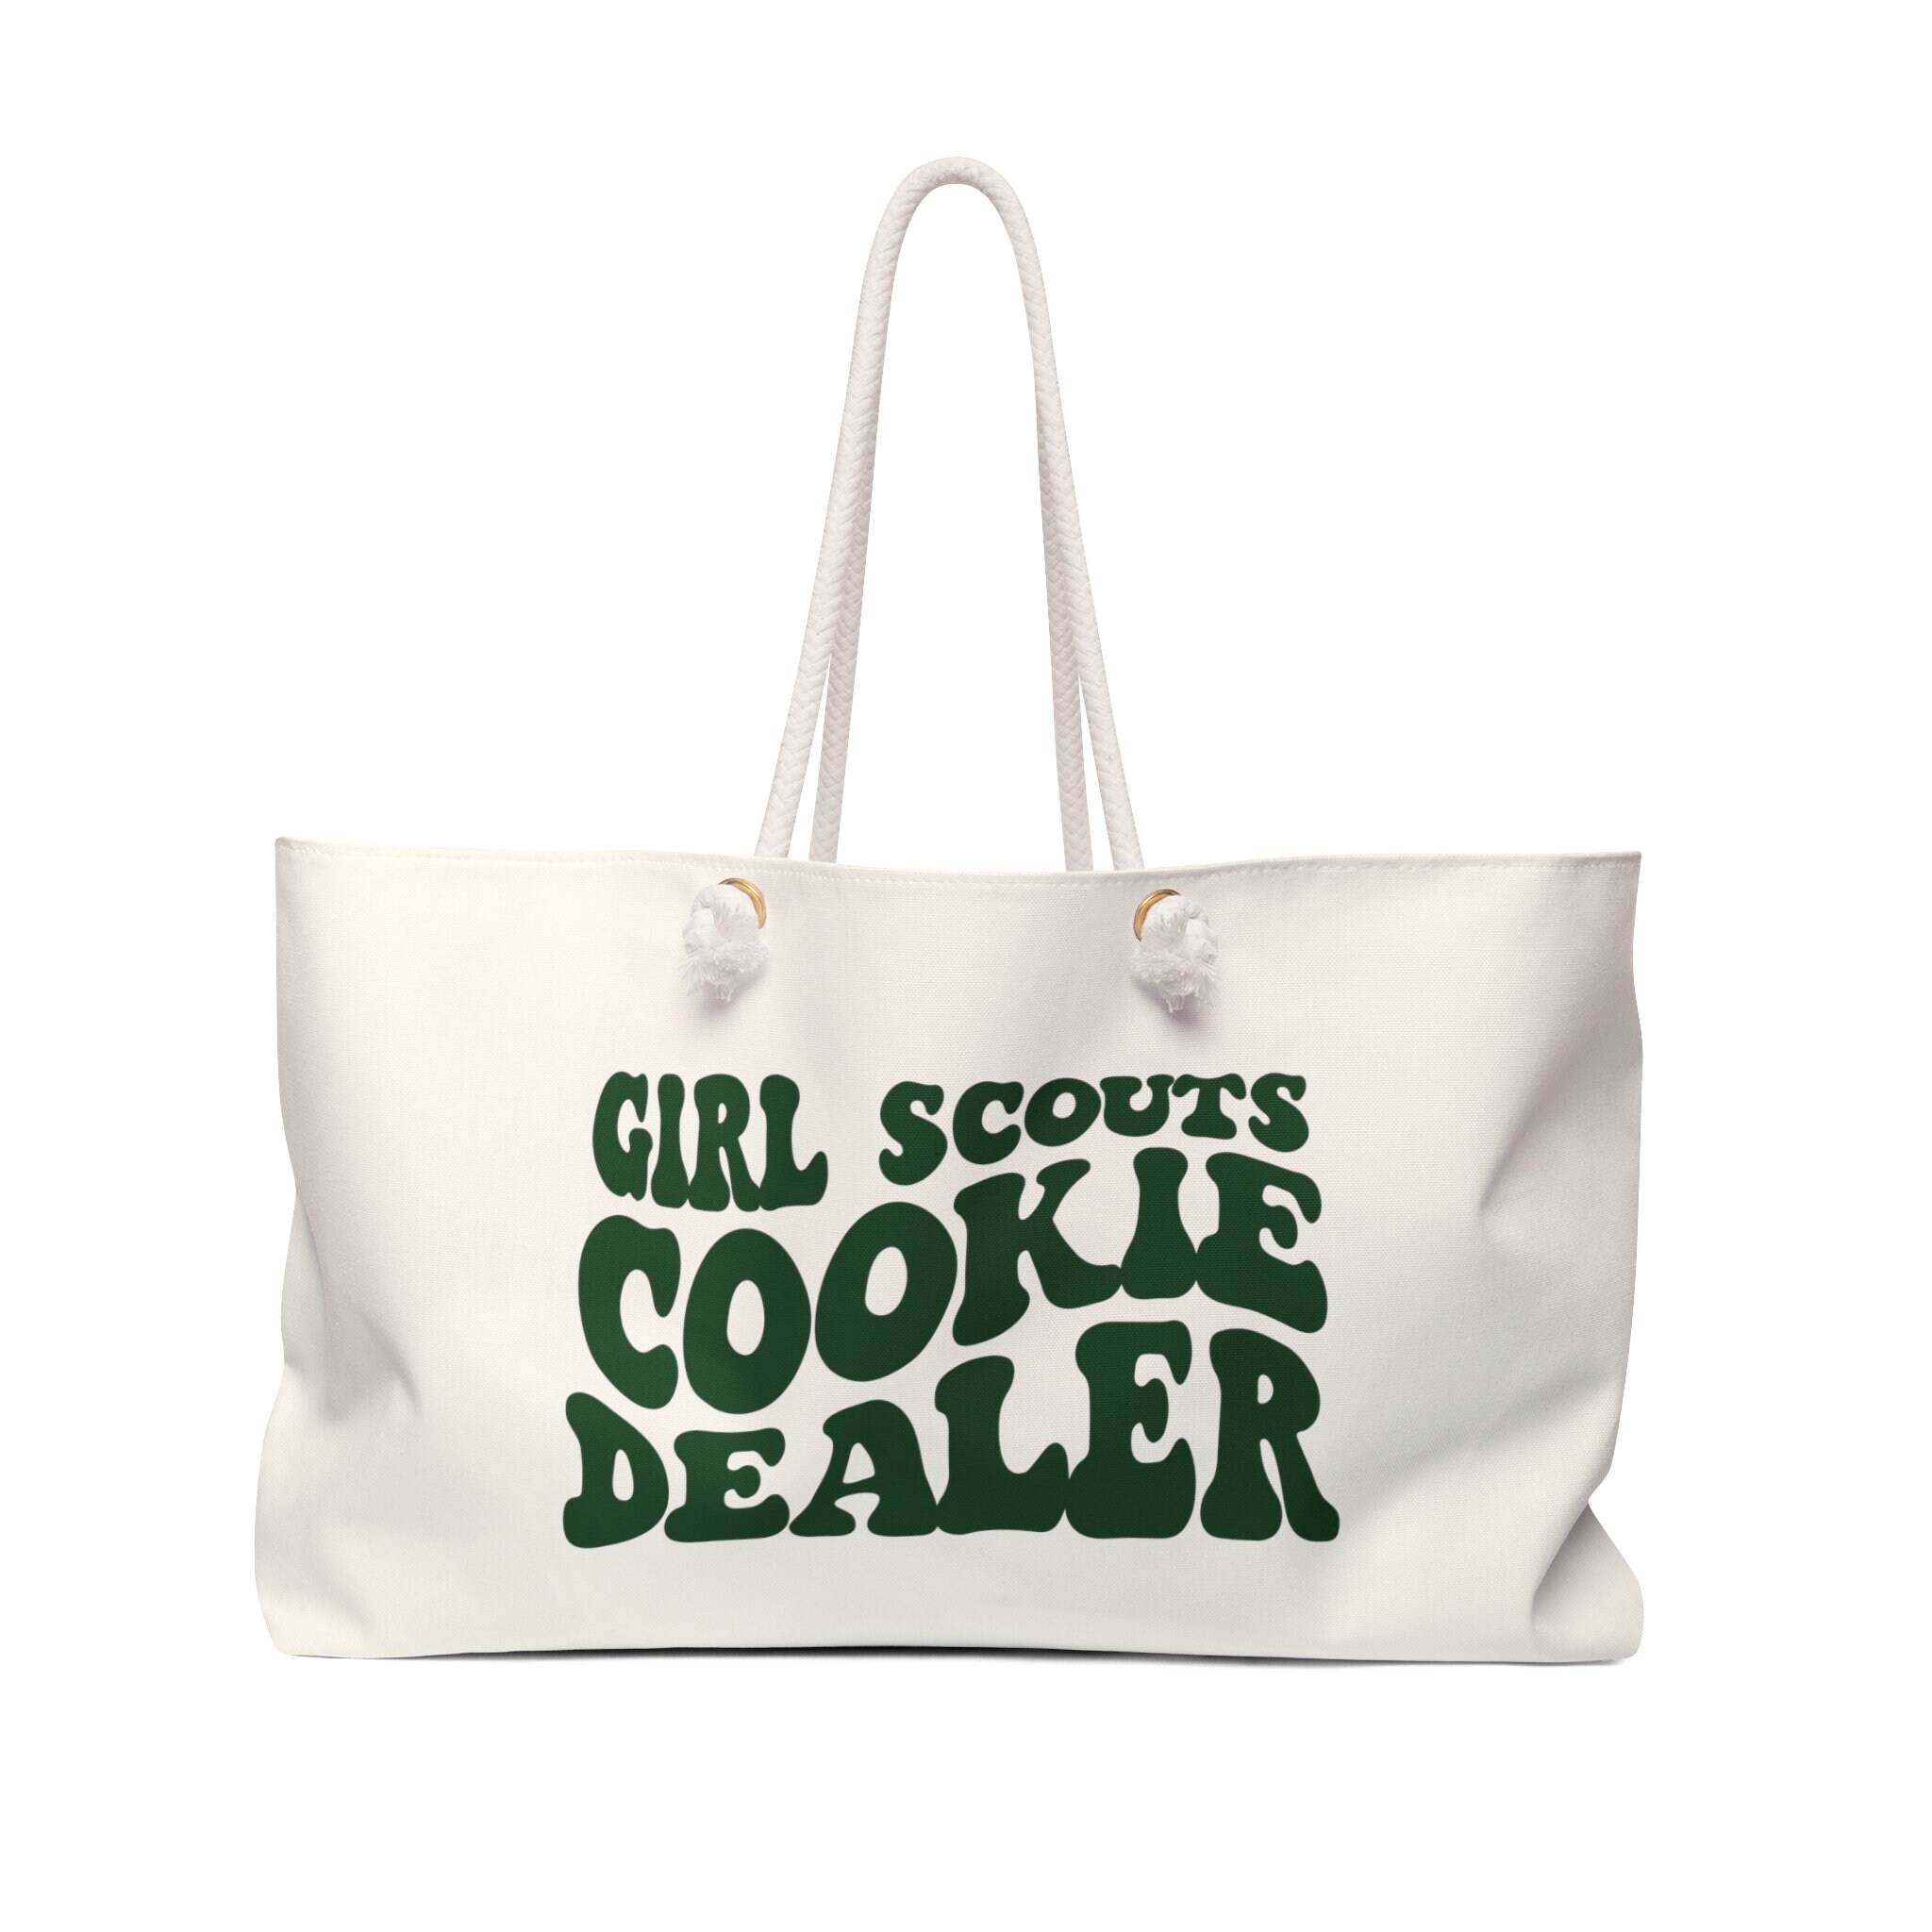 Bulk Custom Tote Bags Your Logo, Art or Photo Printed on Canvas Totes  Wholesale Bags for Small Business, Retail Stores & Corporate Gifts 